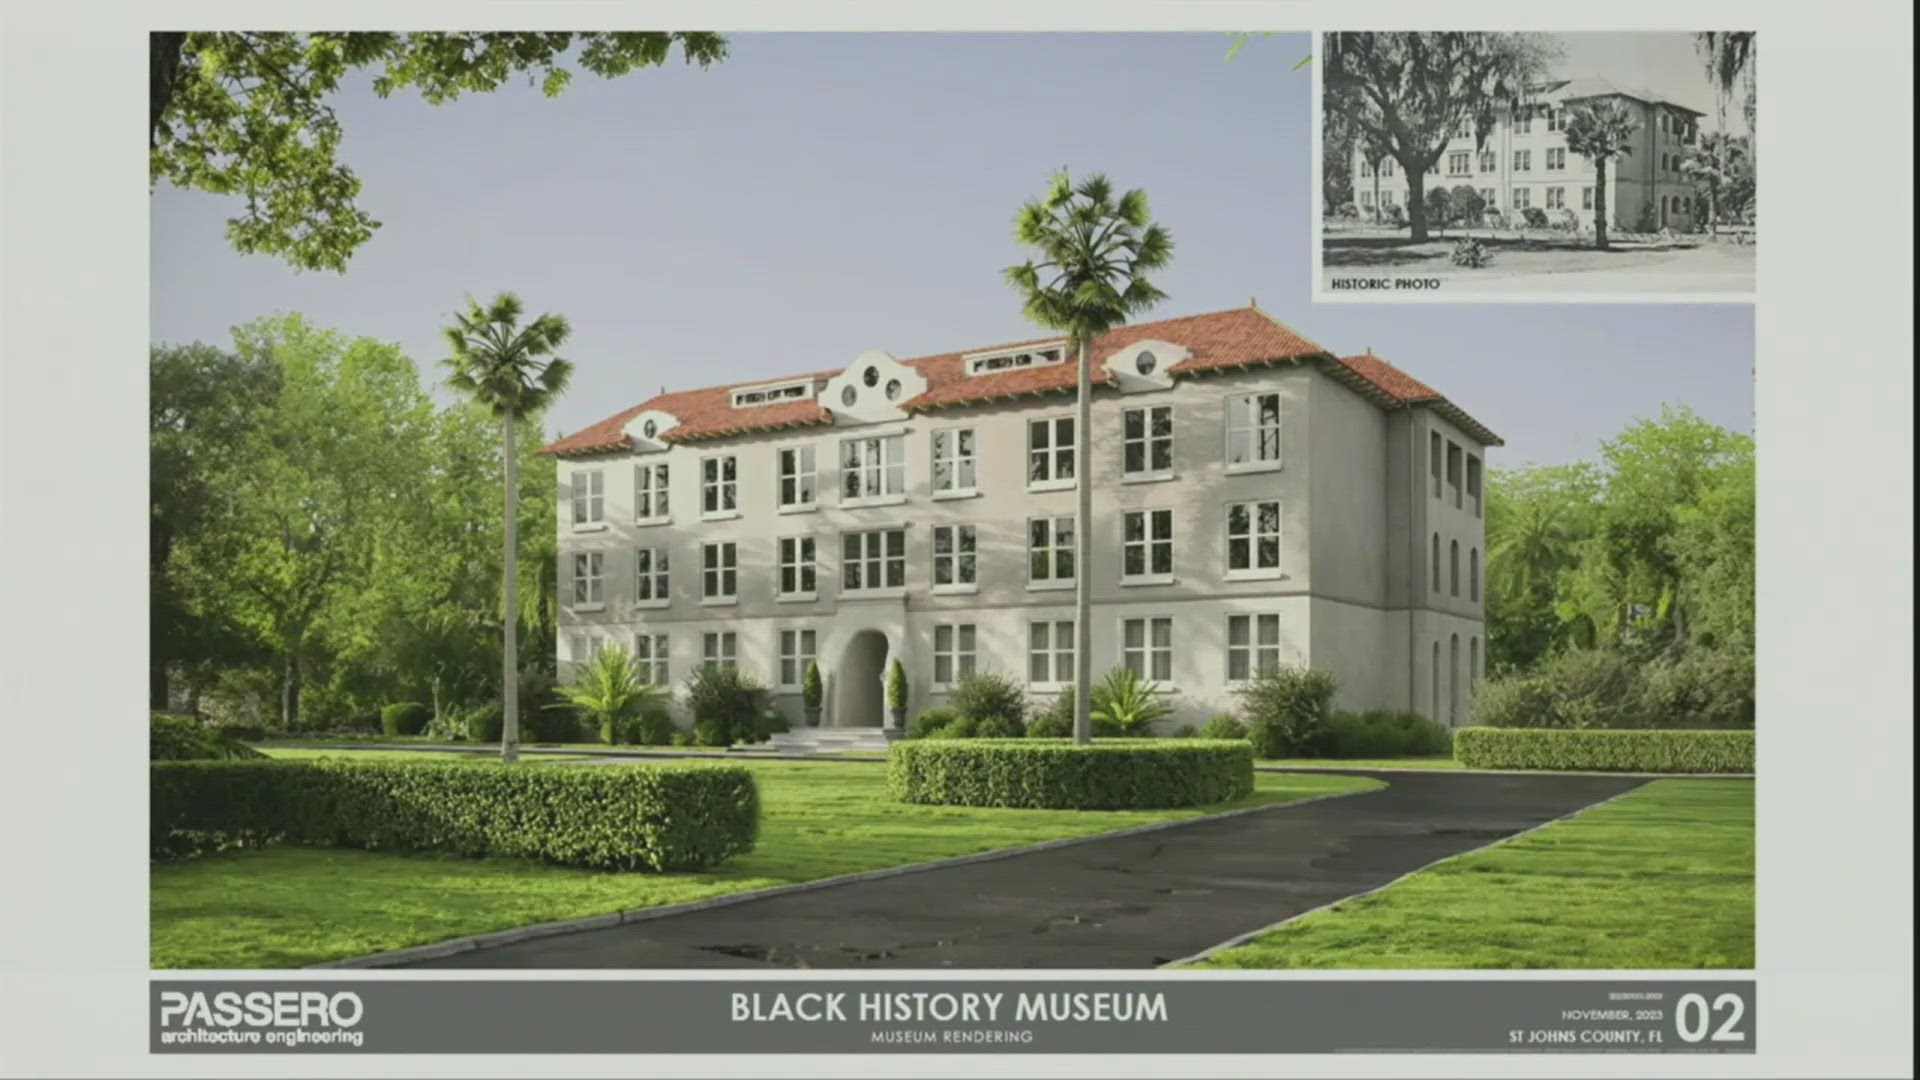 St. Johns County was one of eight areas vying for the museum.